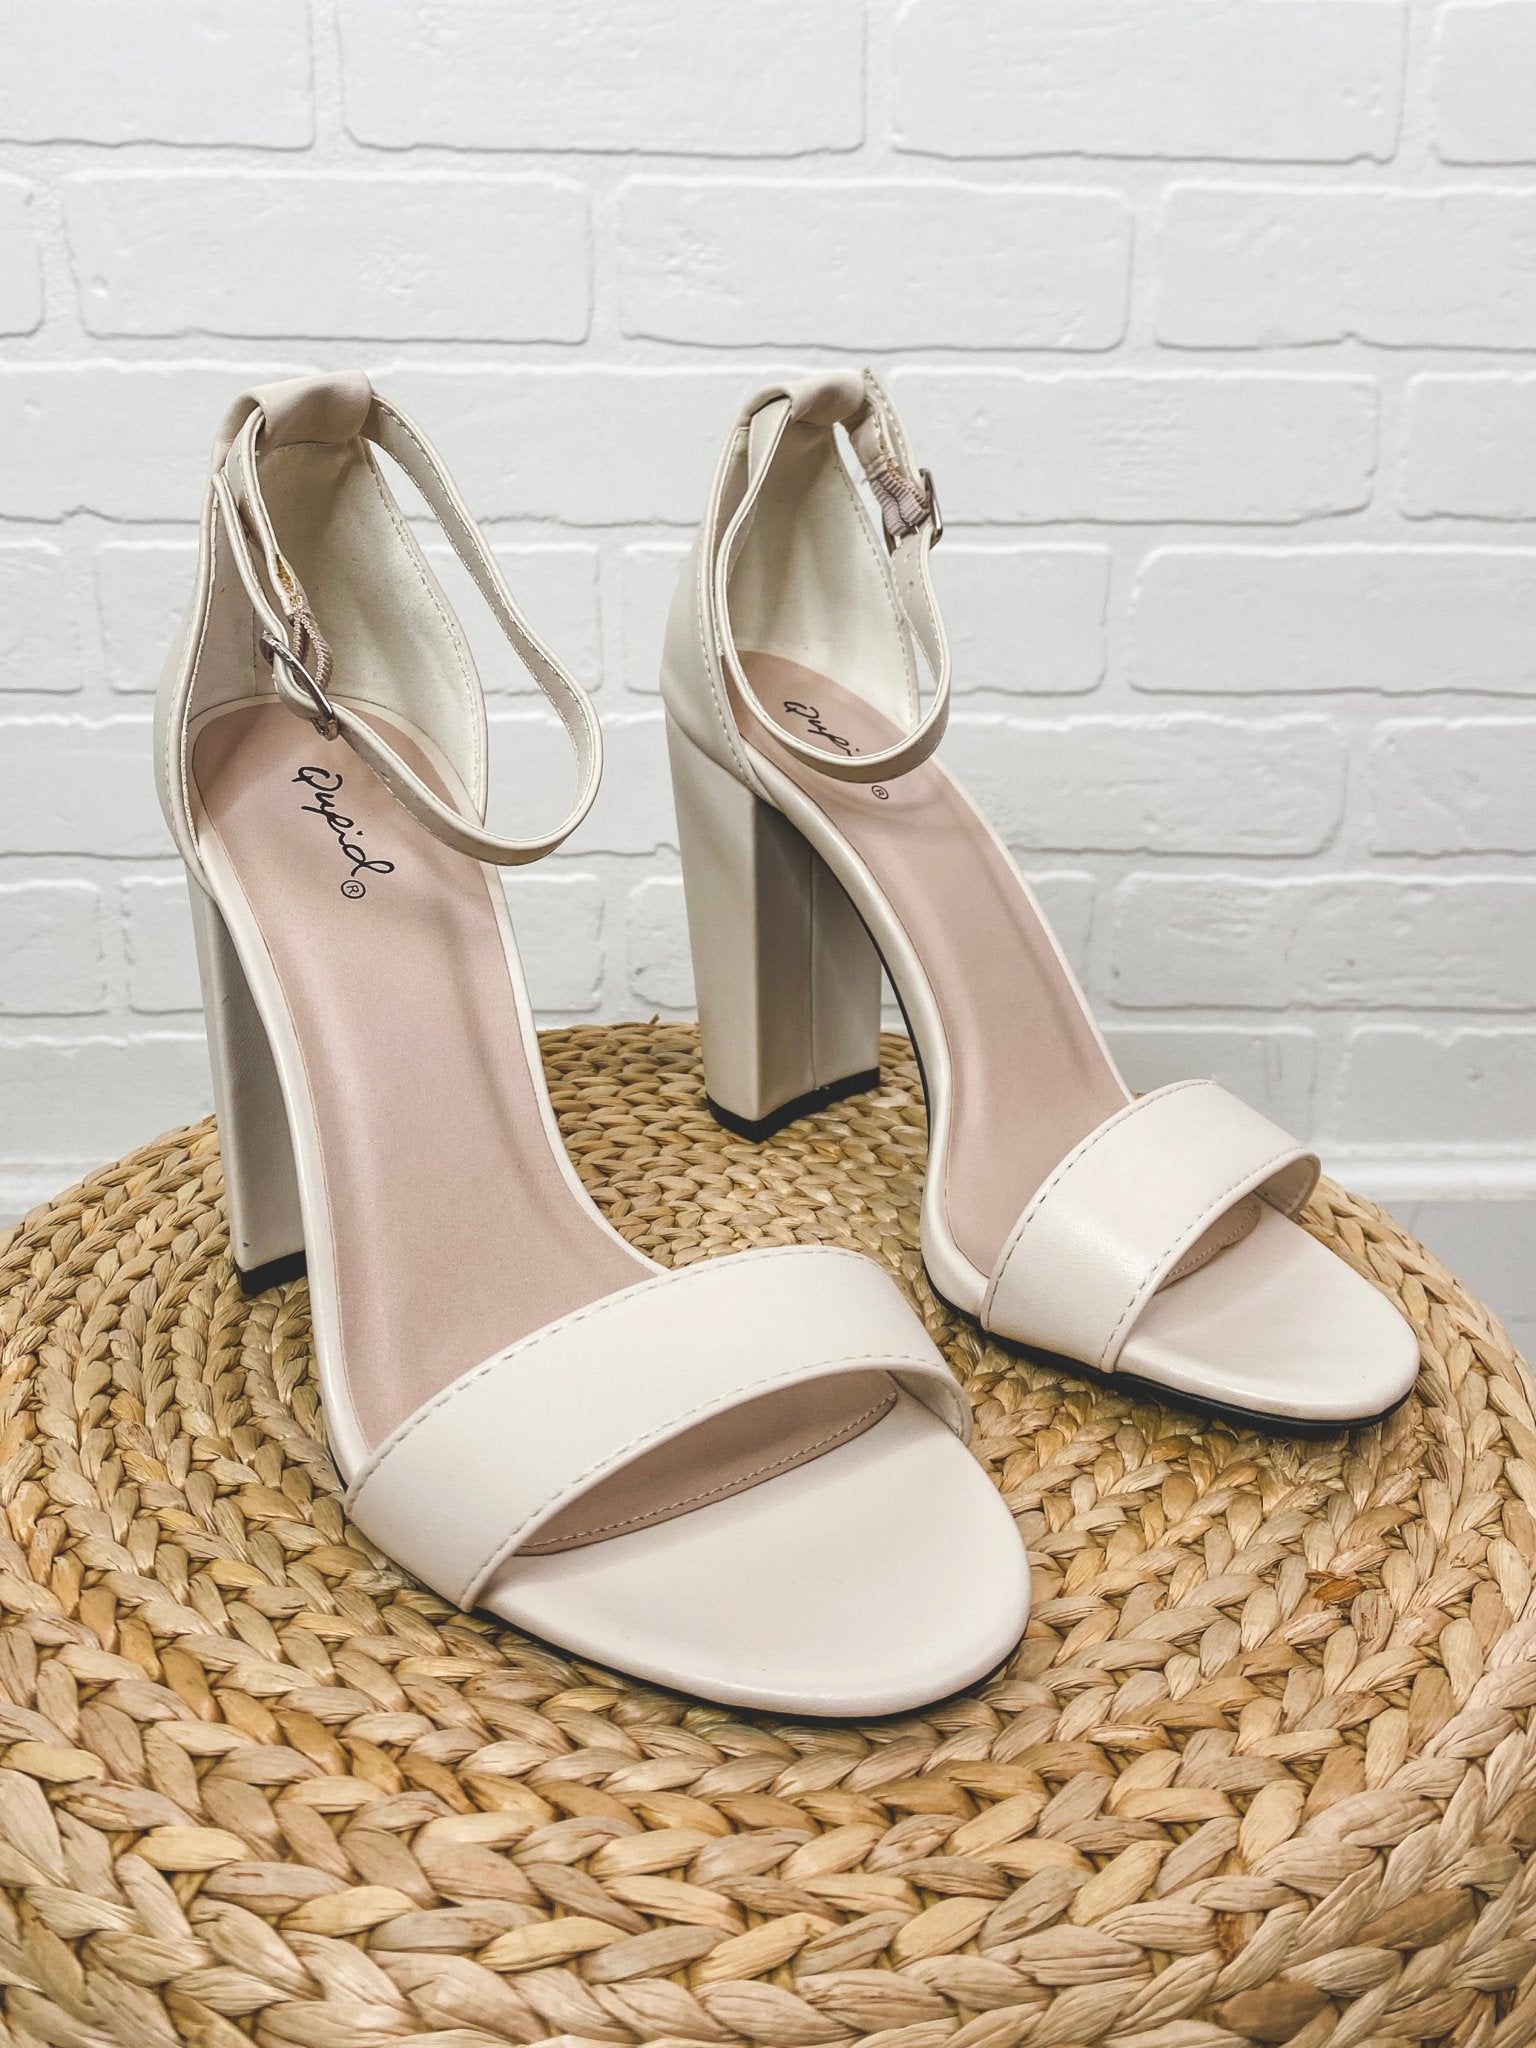 Cashmere ankle strap heel off white - Affordable New Year's Eve Party Outfits at Lush Fashion Lounge Boutique in Oklahoma City